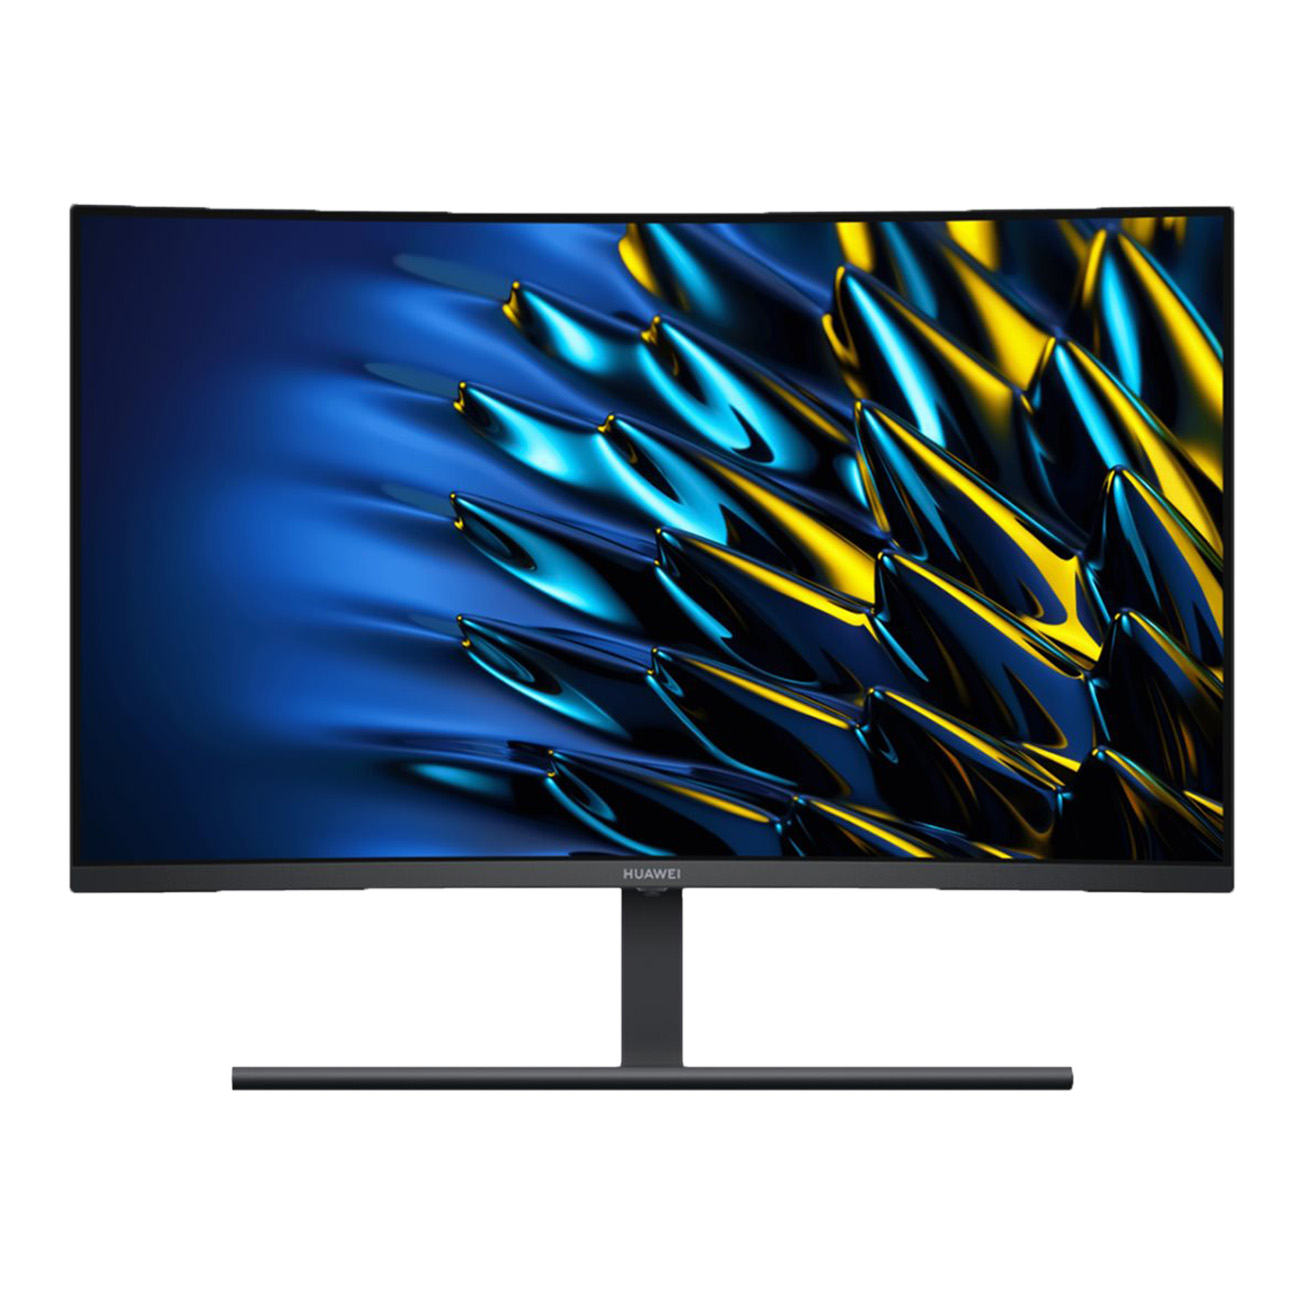 MateView Full-HD nativ) HUAWEI GT ms 165 Reaktionszeit , 165 Curved (XWU-CBA) Hz Hz , 27 Zoll 27 (4 Monitor